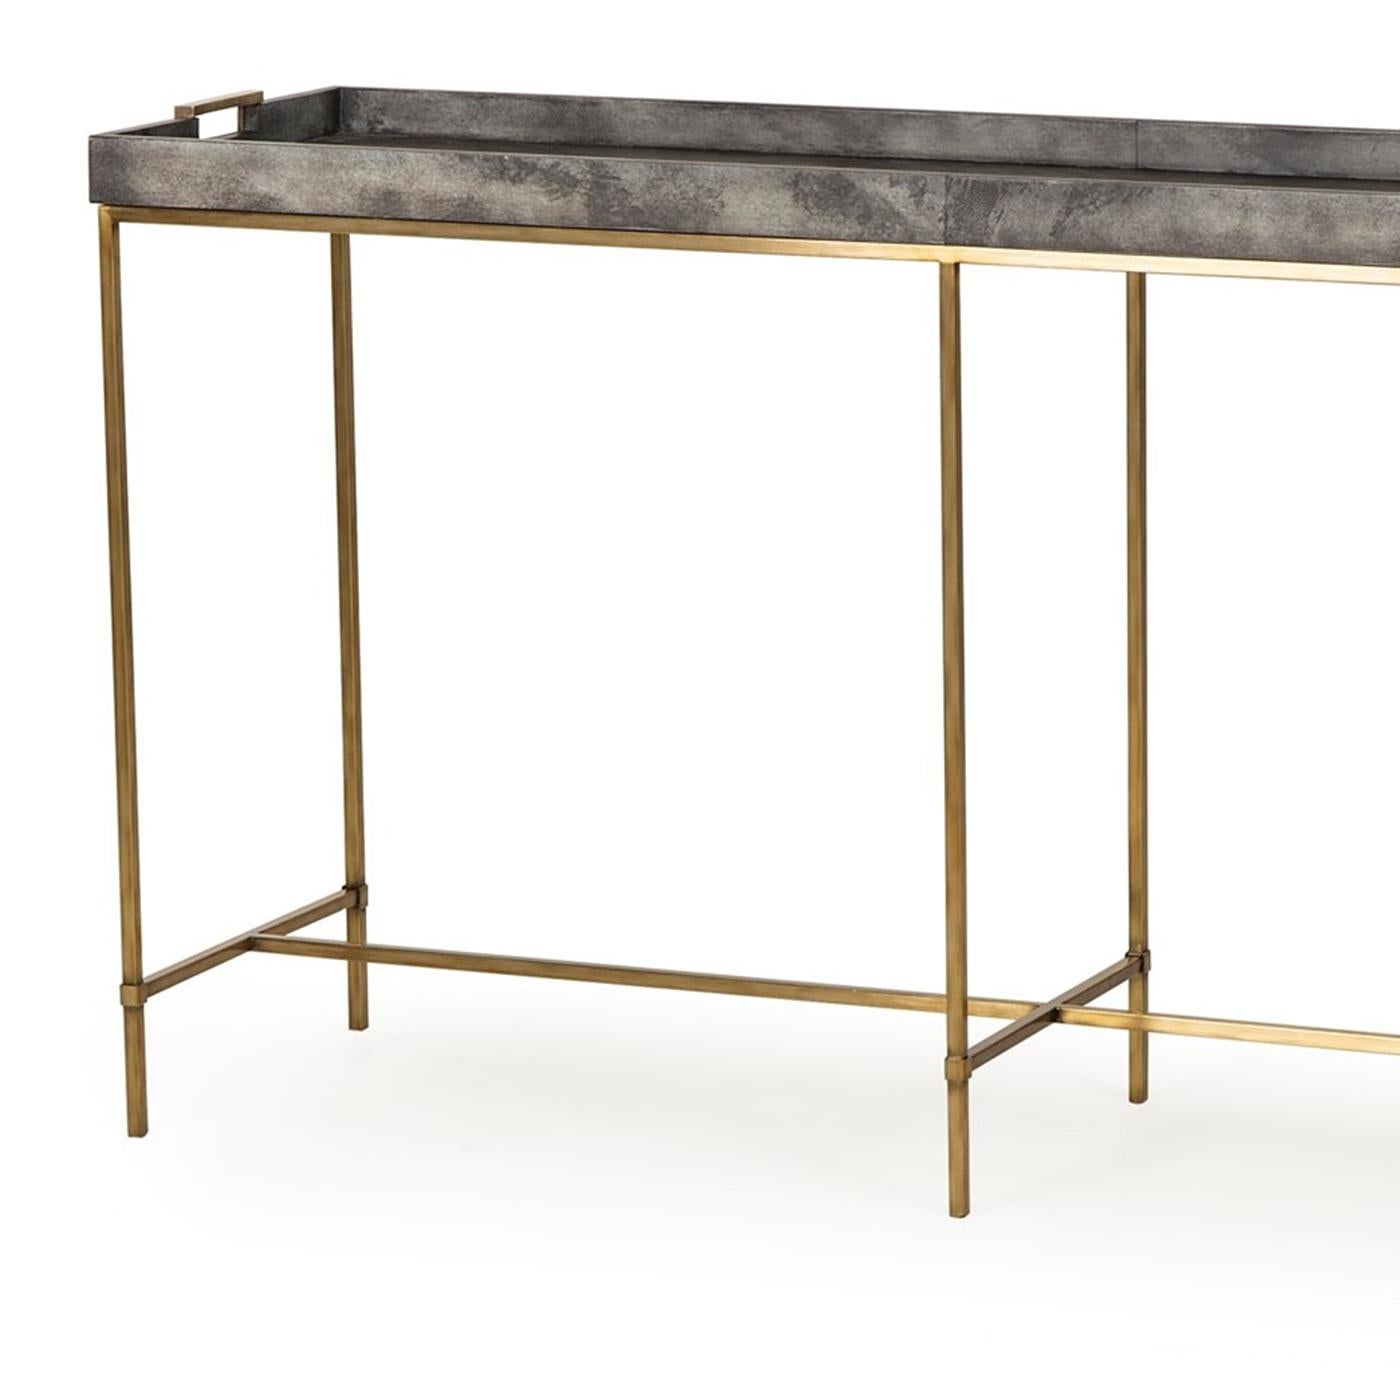 Console table charcoal grey with base
in stainless steel in brass finish. With top
in poplar wood painted in charcoal grey
finish.
Also available in coffee table and side table.